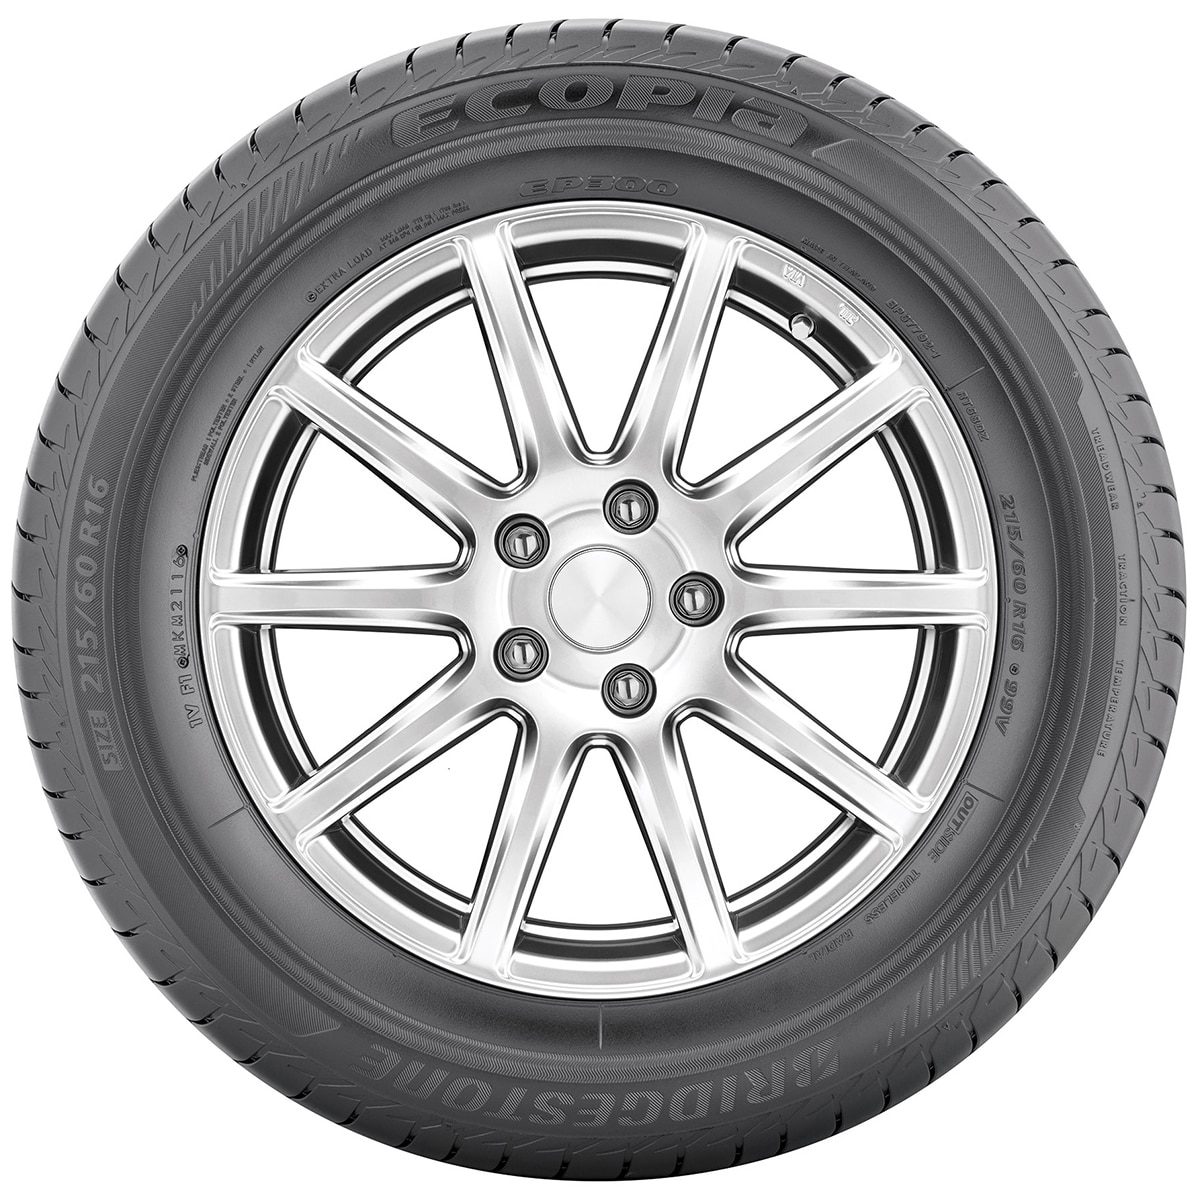 195/60R15 88V BS EP300 - tyre